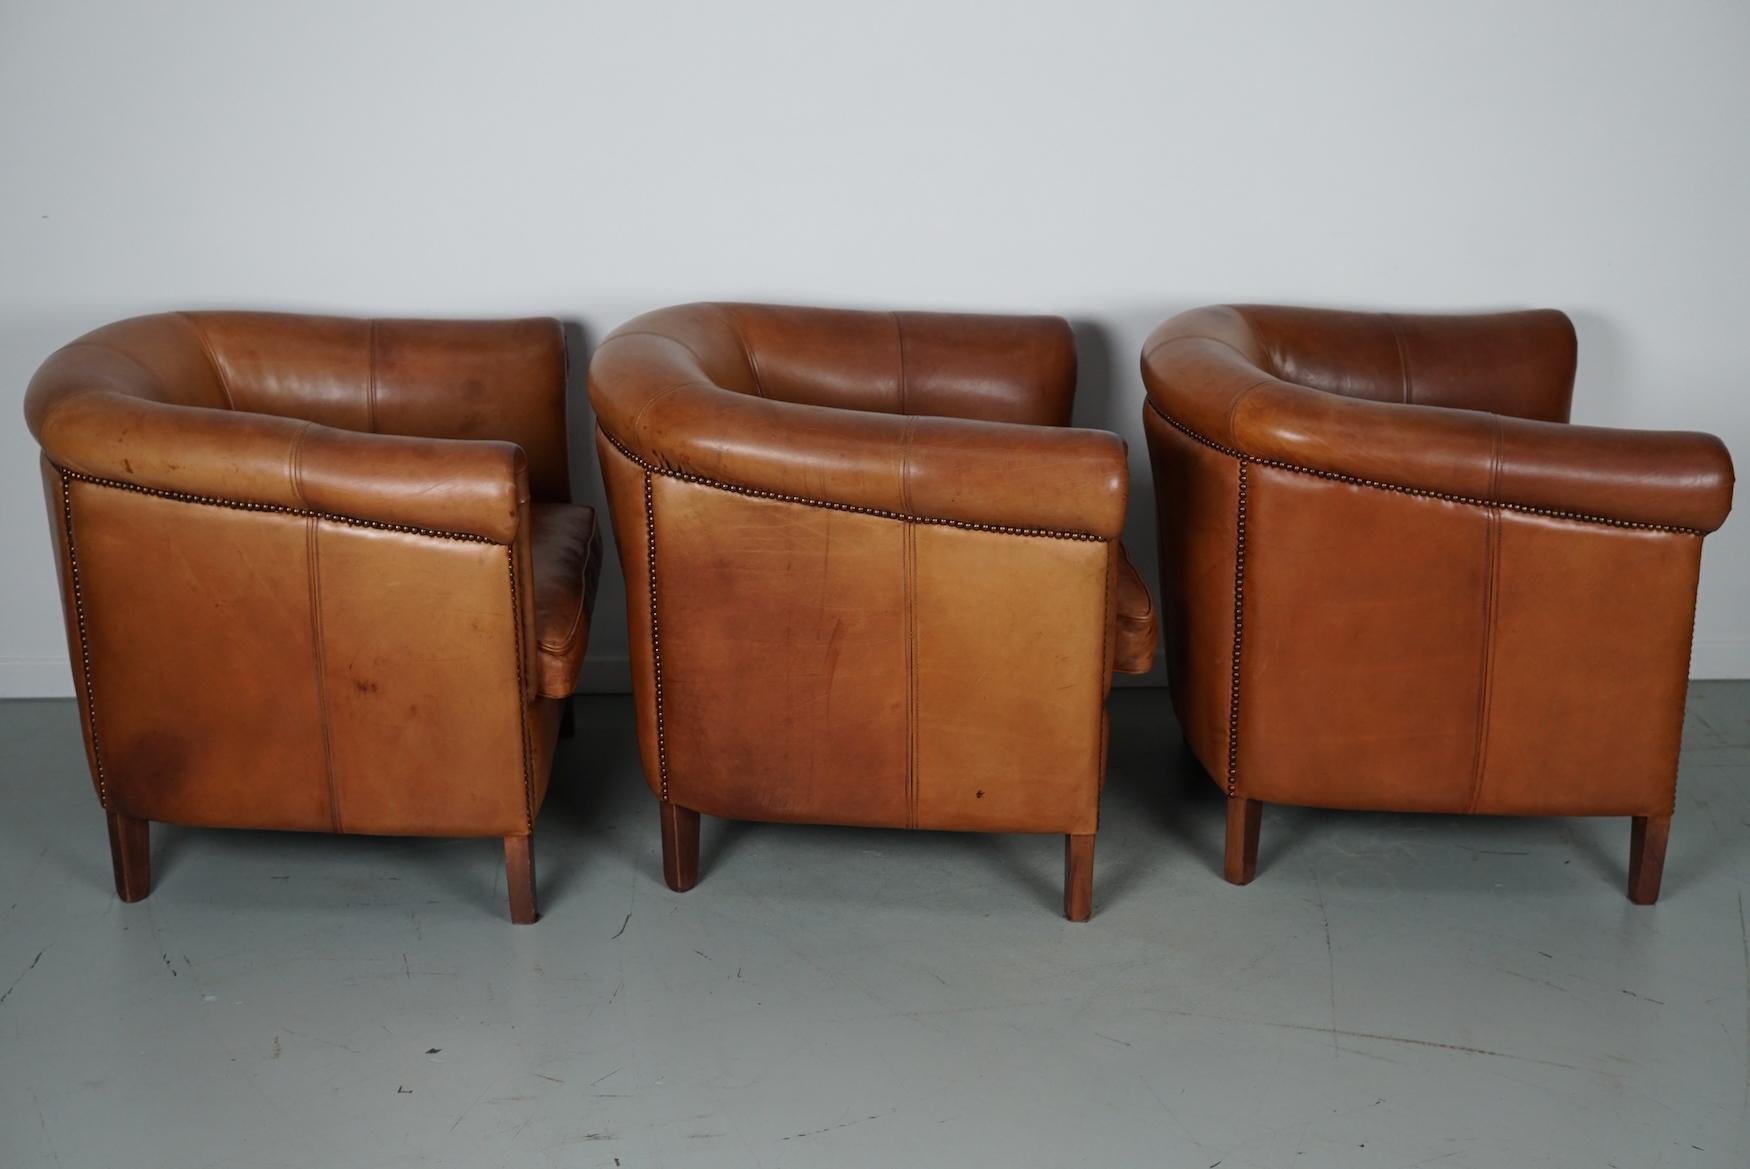  Vintage Dutch Cognac Leather Club Chairs, Set of Three with Two Footstools For Sale 12